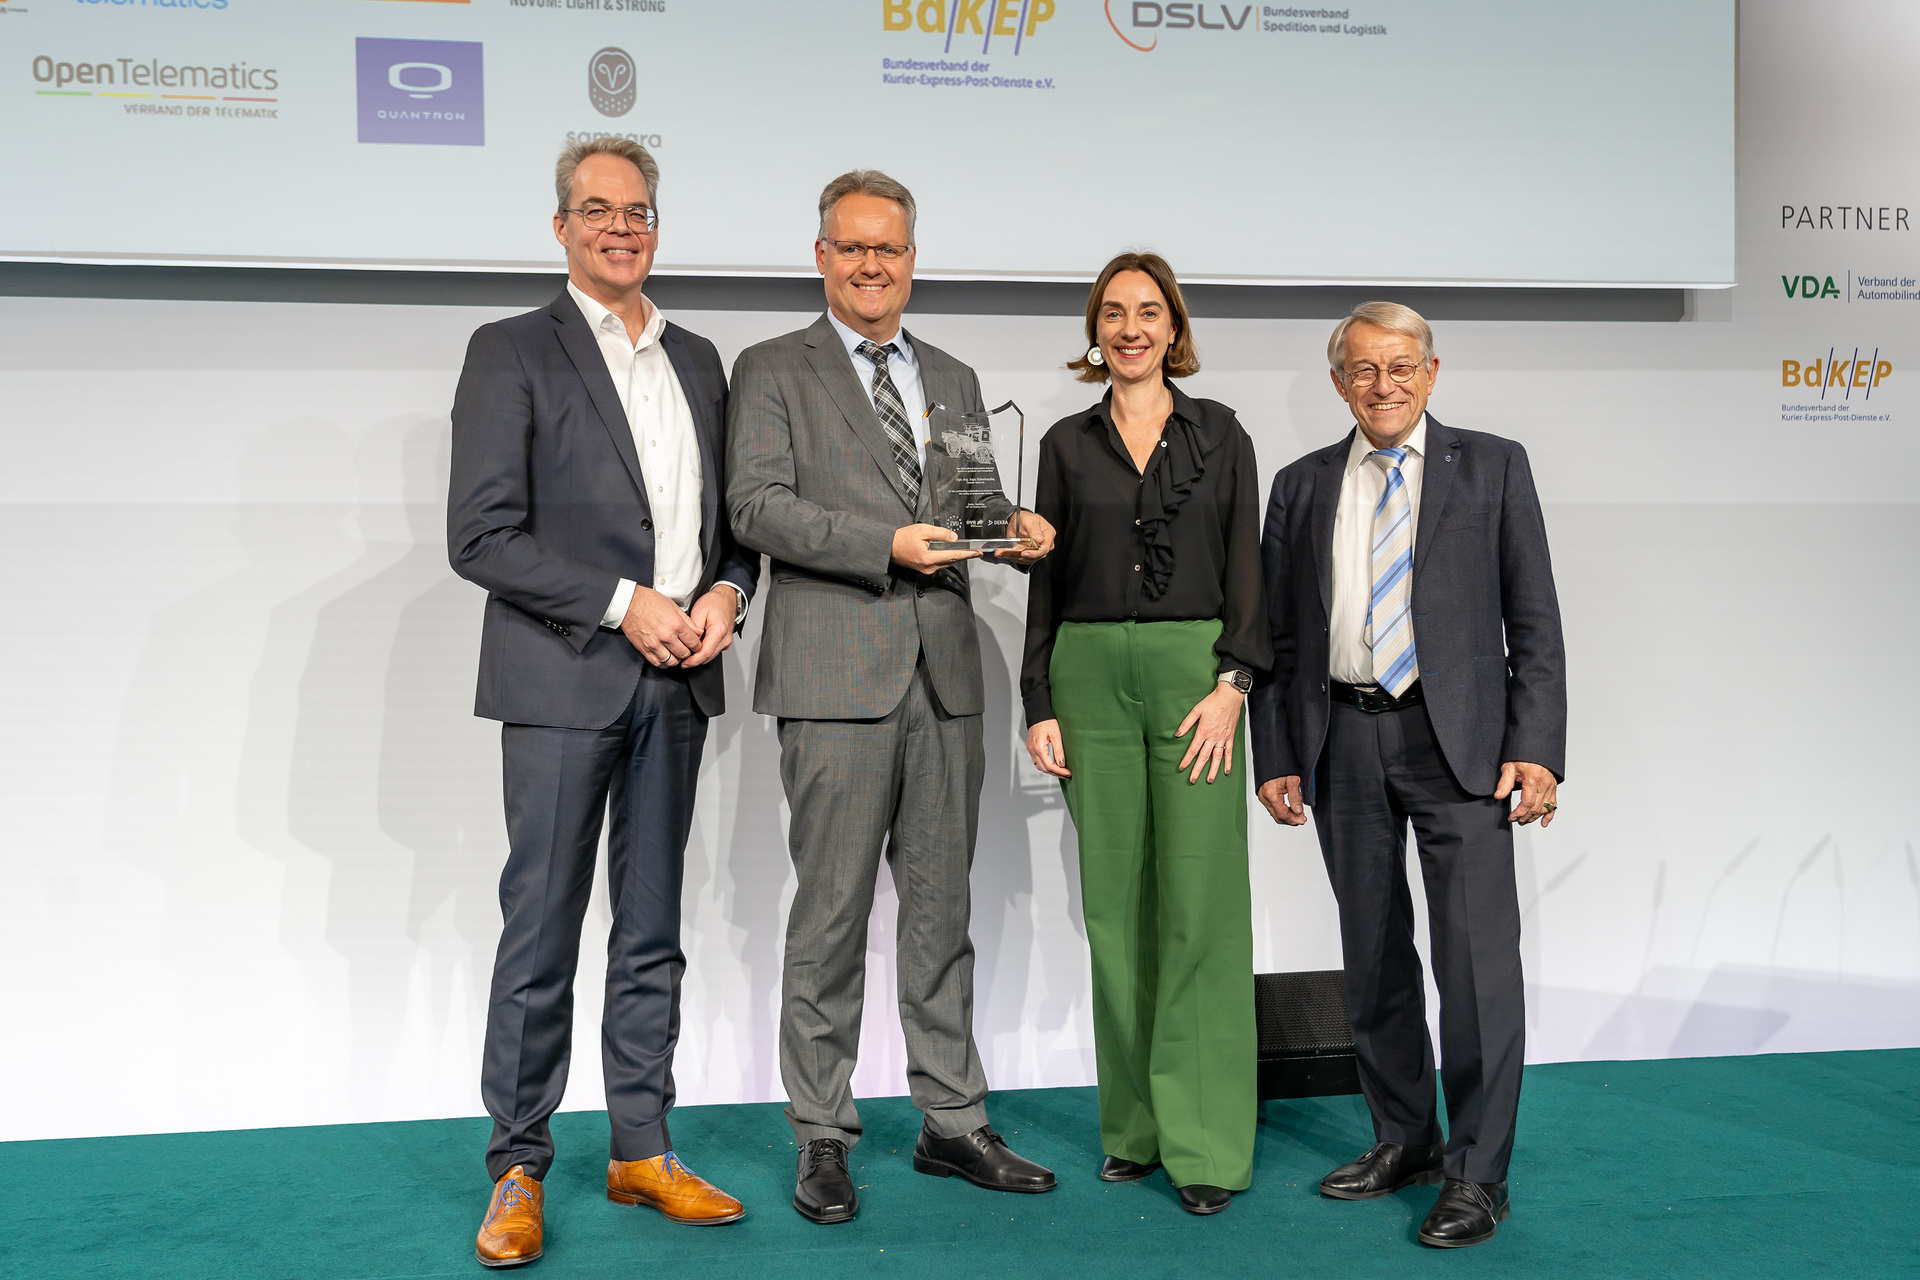 Ingo Scherhaufer, Head of Active Safety Development at Daimler Truck AG, awarded the European Commercial Vehicle Safety Award